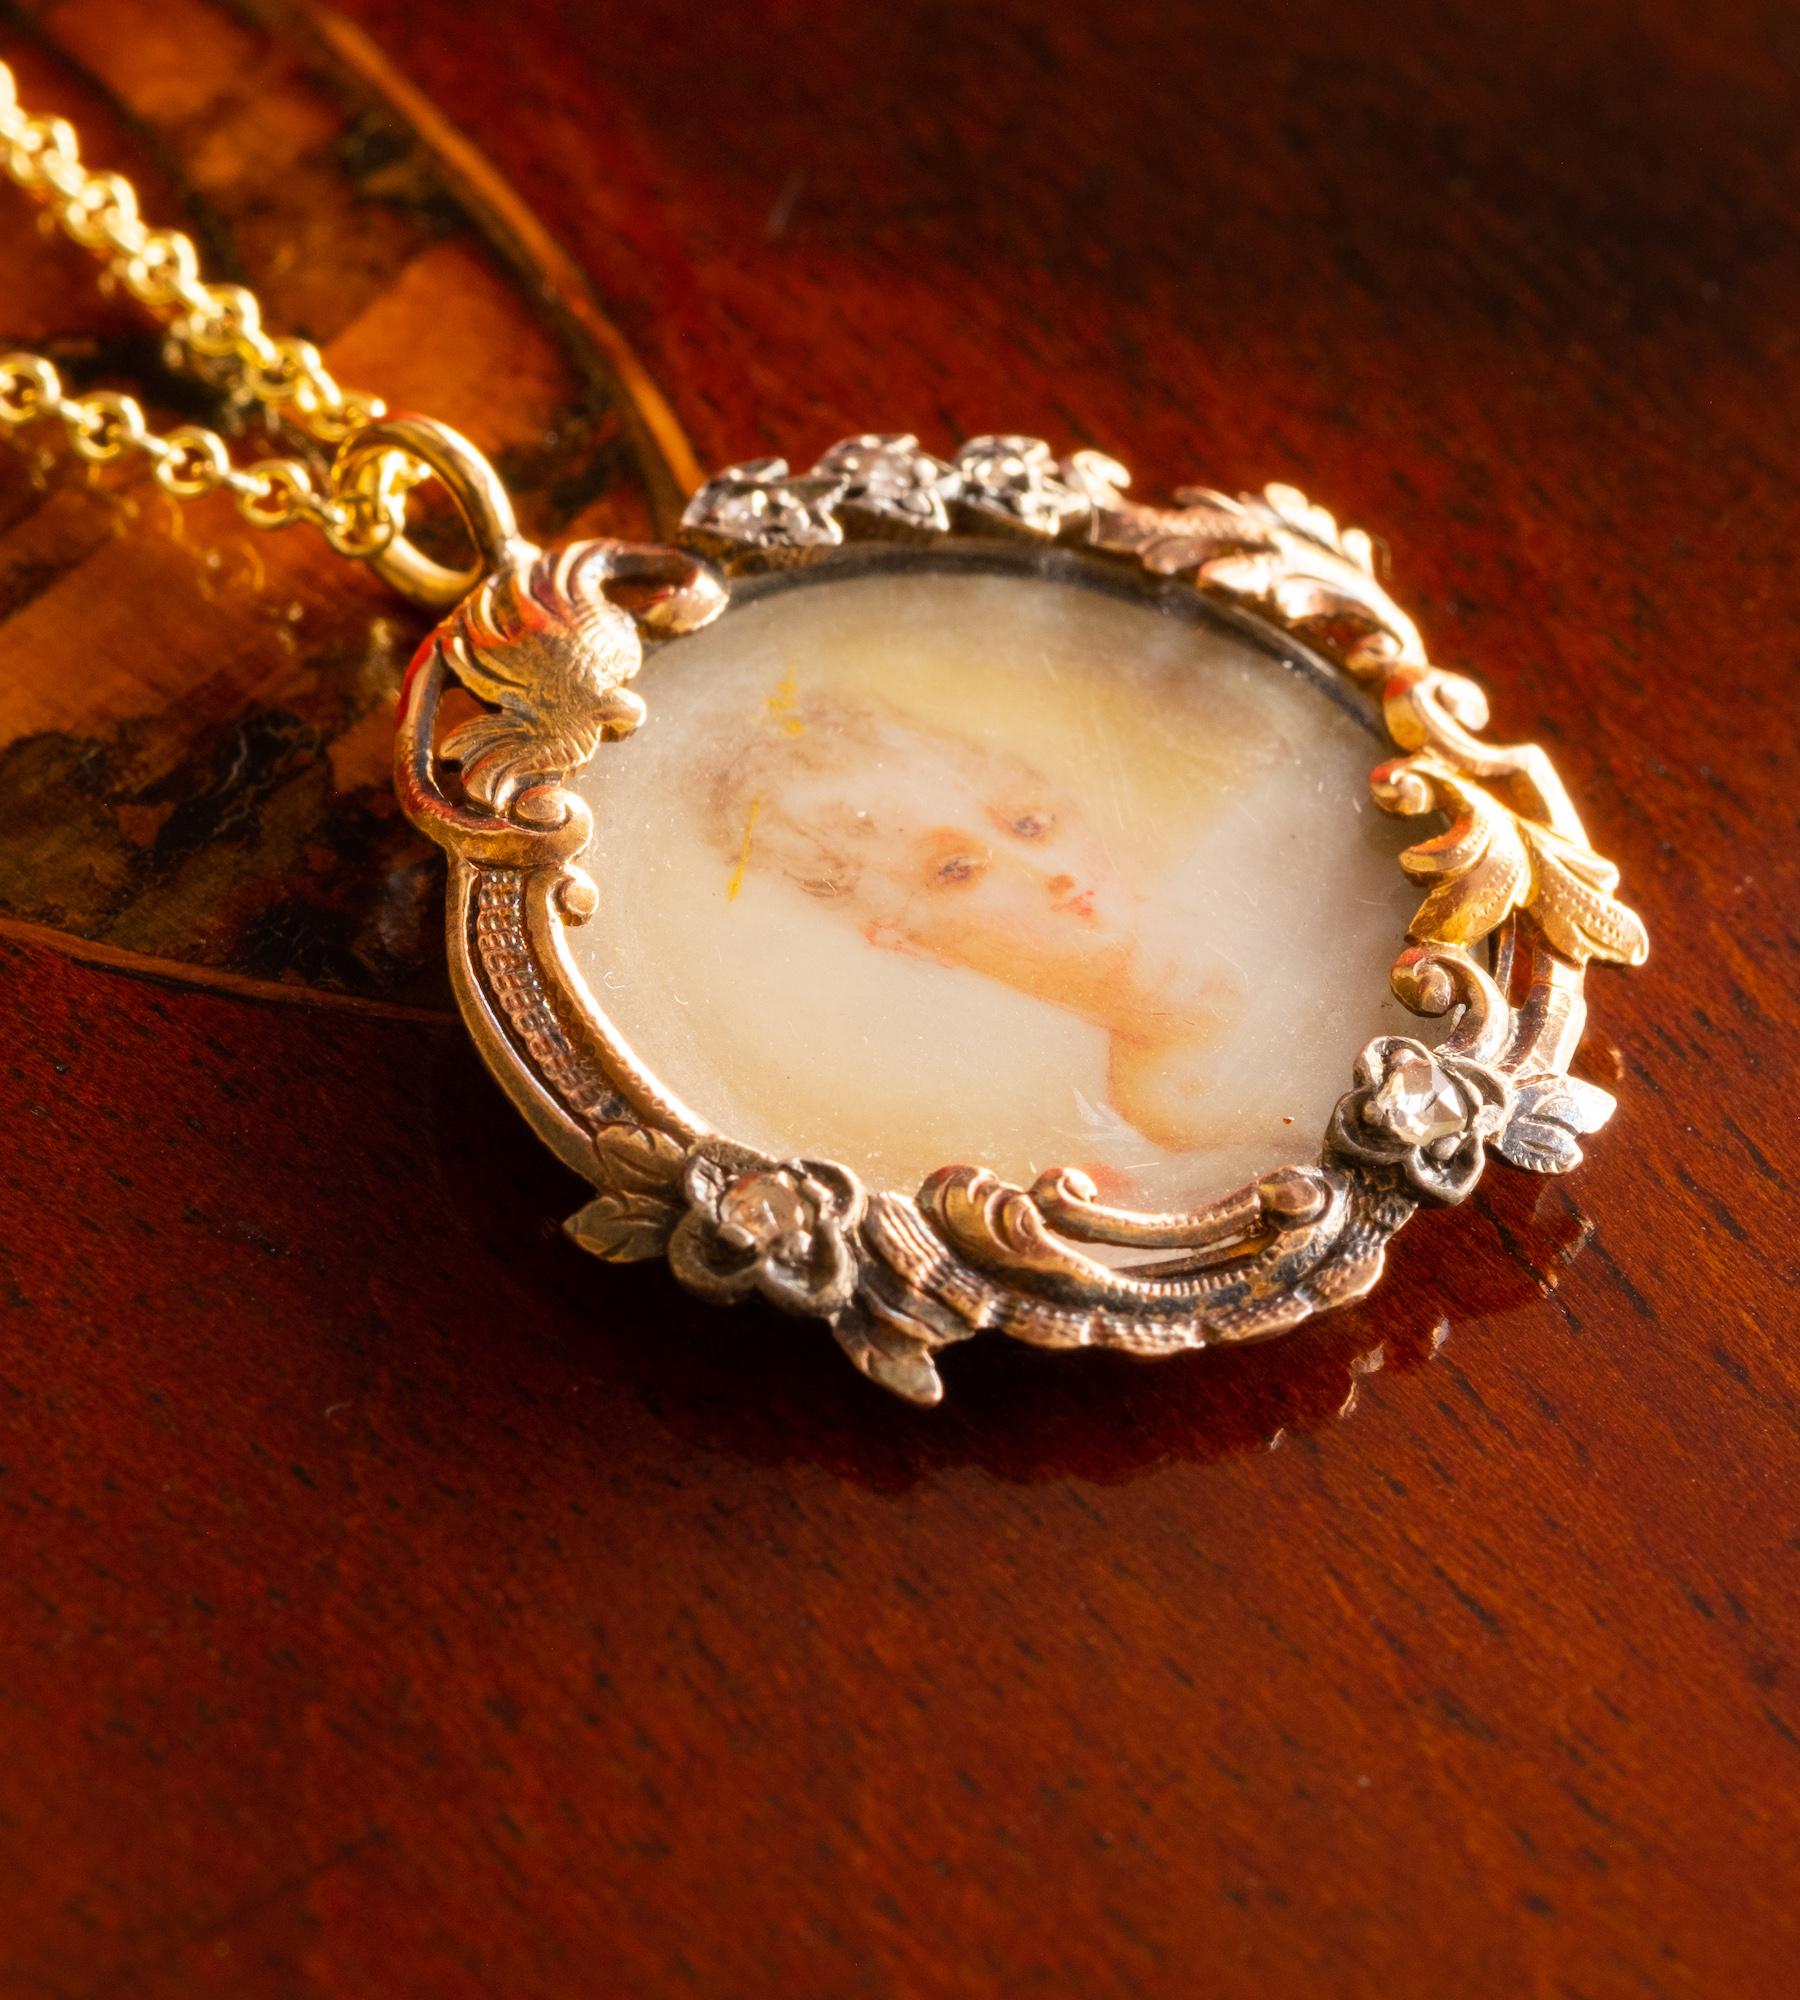 A rare and elegant late Georgian portrait miniature locket pendant, set with five old cut diamonds in a floral motif and cast in 9ct gold. 
The portrait of the lady is painted on ivory, set in gold, with an opening locket compartment behind.
The